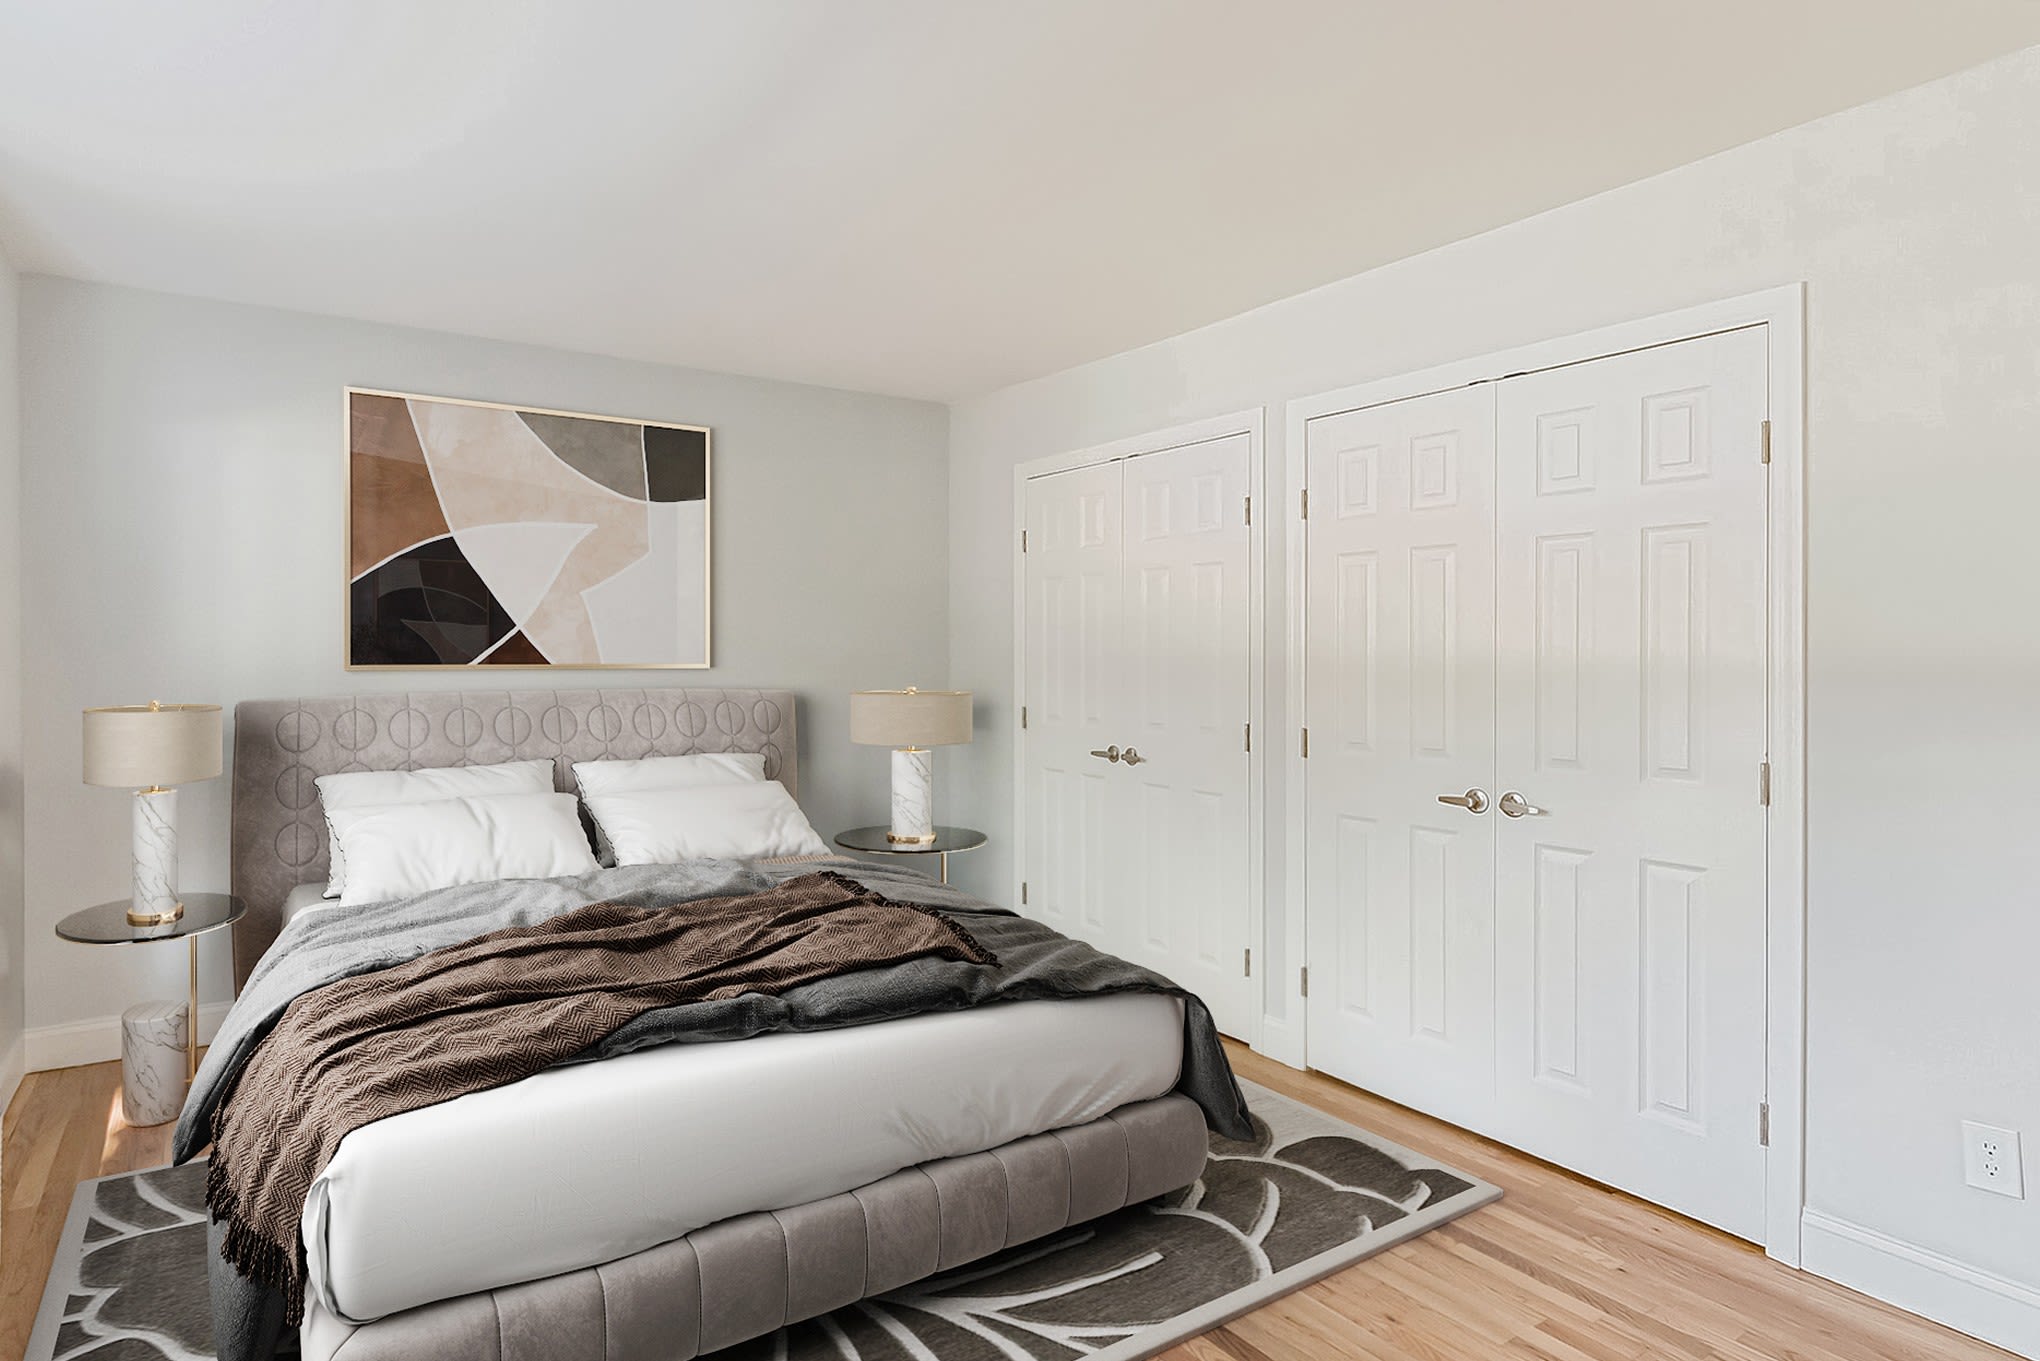 Master bedroom at Eagle Rock Apartments at Nesconset in Nesconset, New York